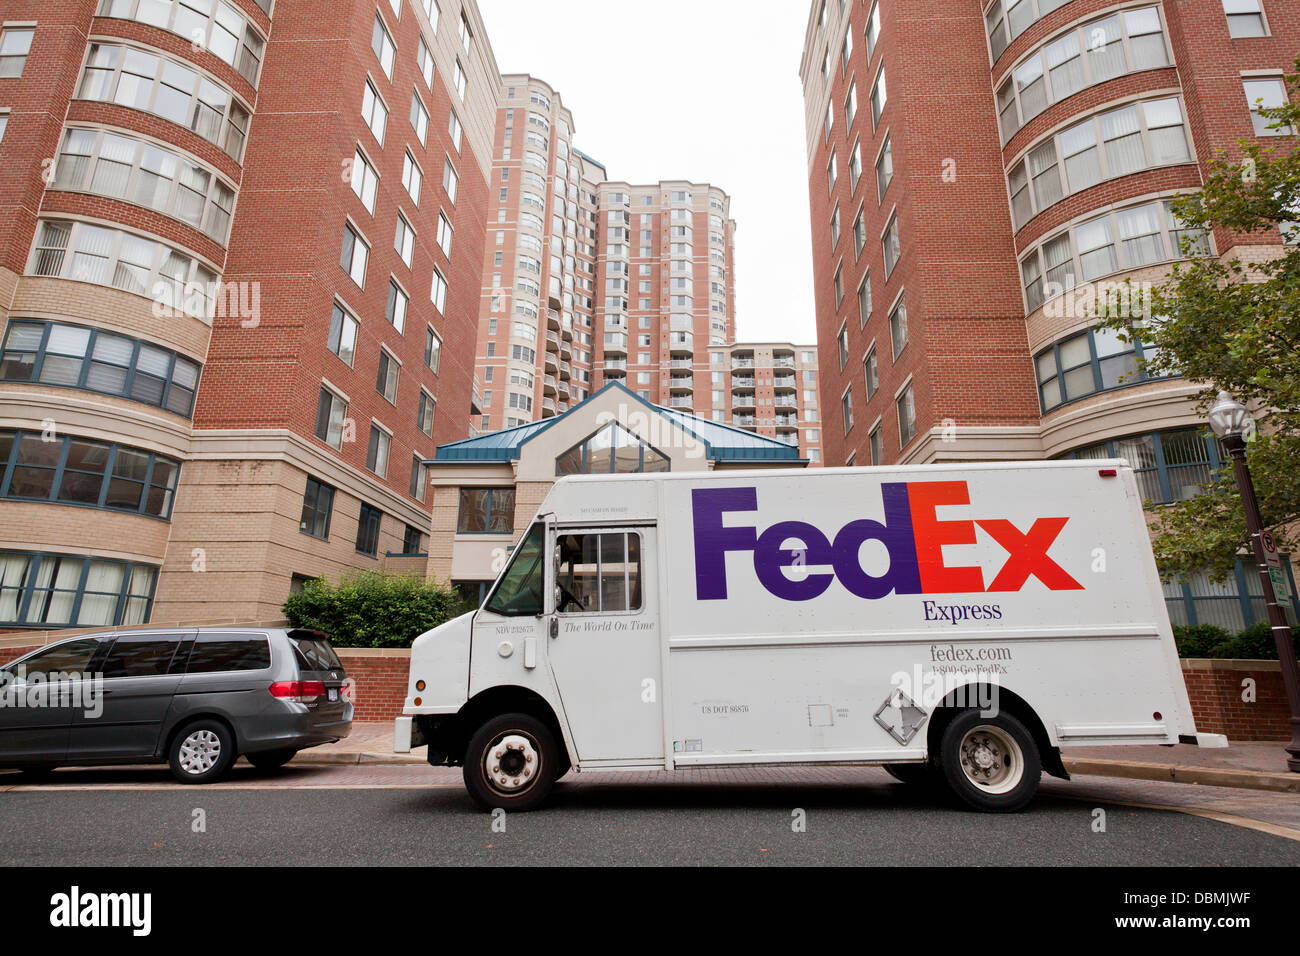 FedEx delivery truck parked in front of apartment building Stock Photo